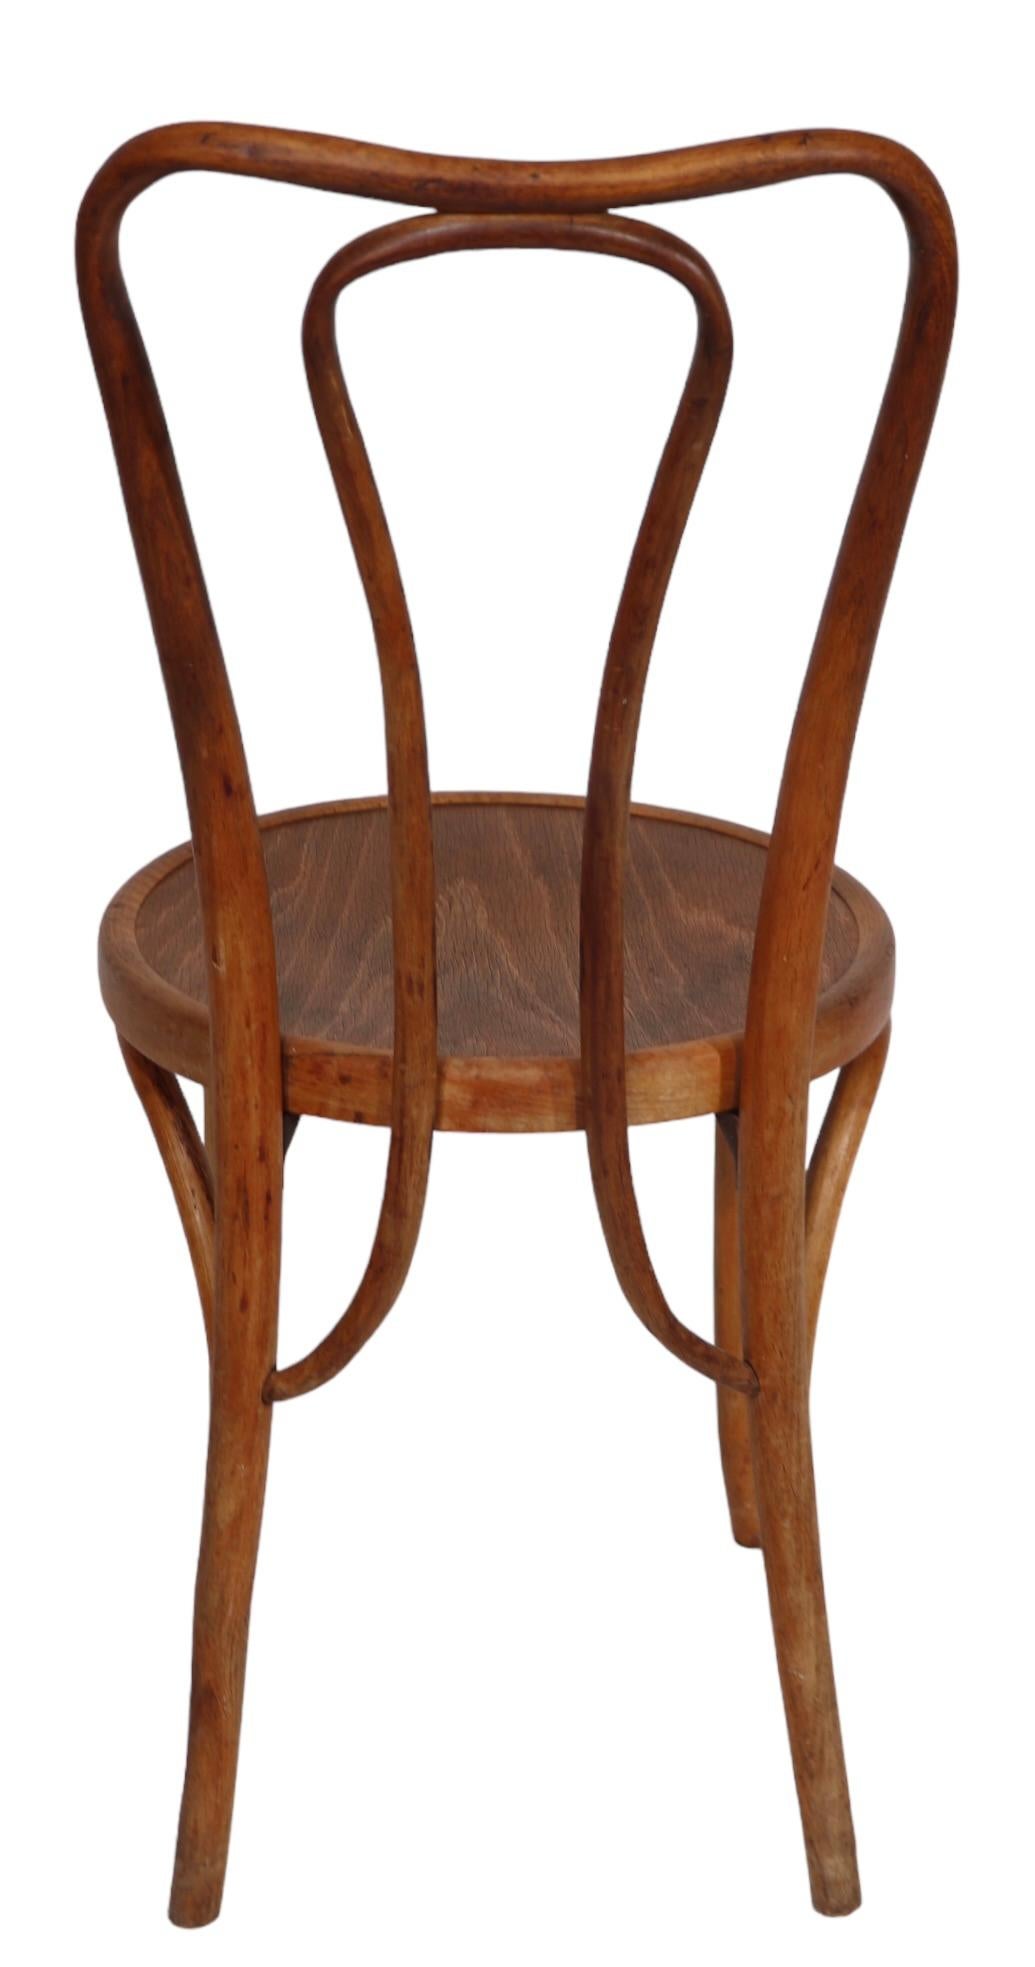 Vienna Secessionist Bentwood Chairs att. to Thonet  Made in Poland 3 available  3